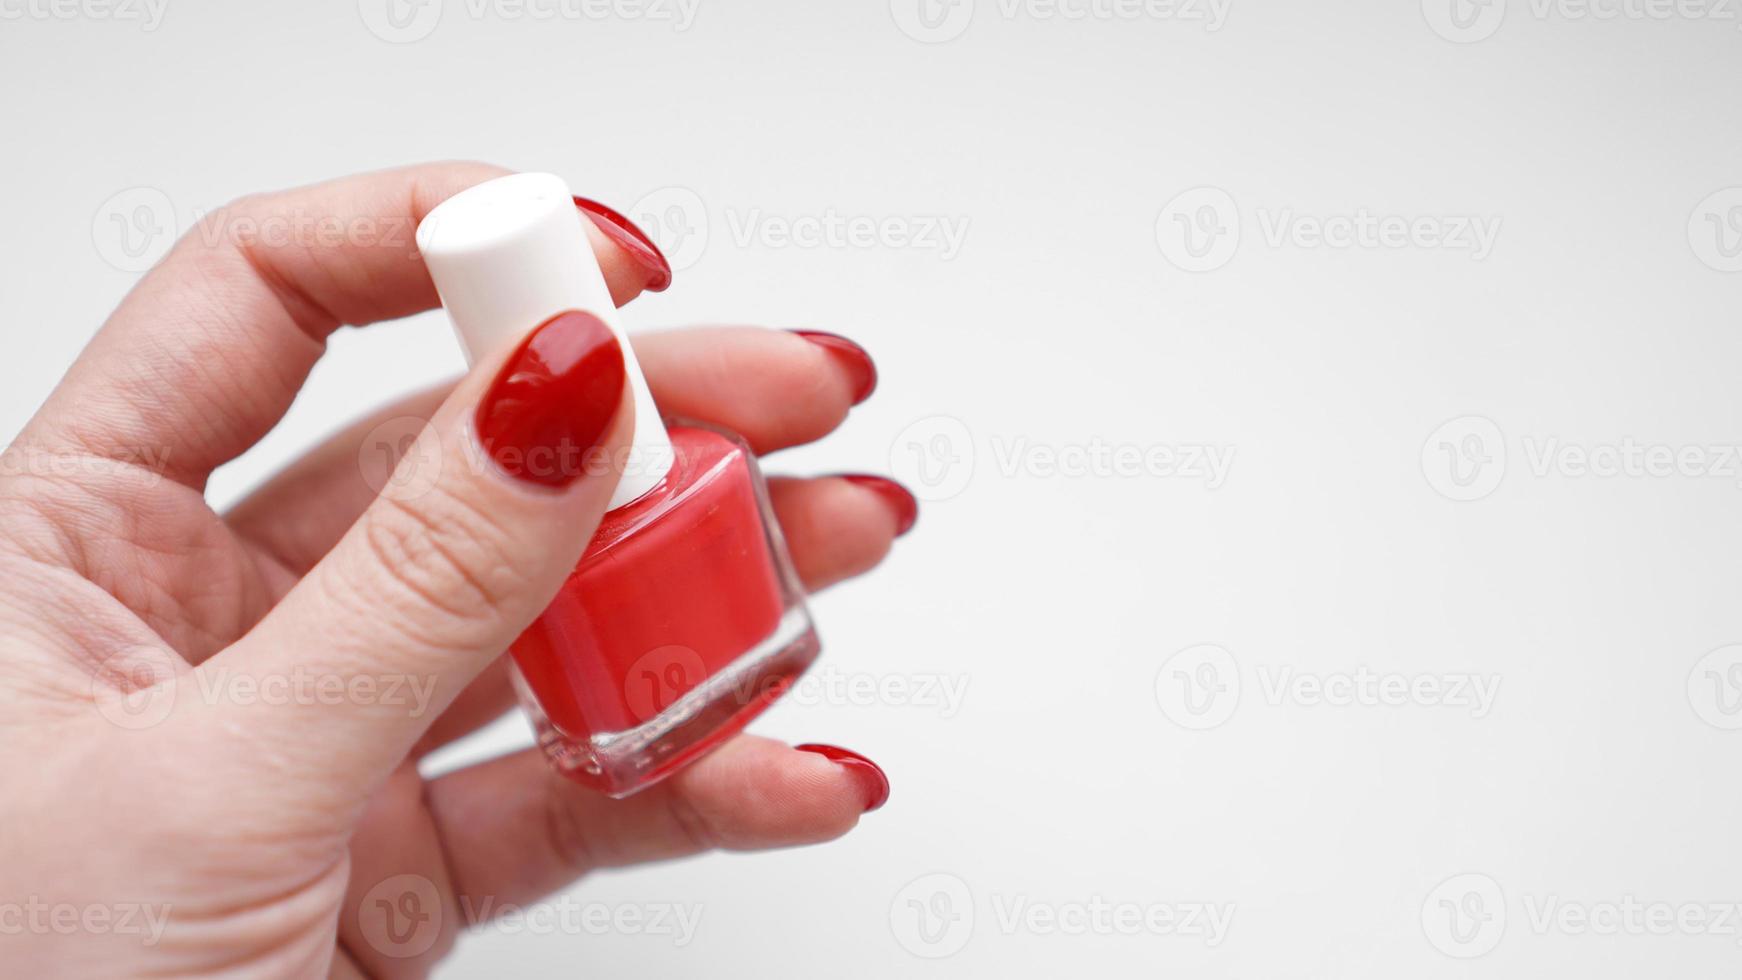 Manicure. Beautiful manicured womans nails with red nail polish photo